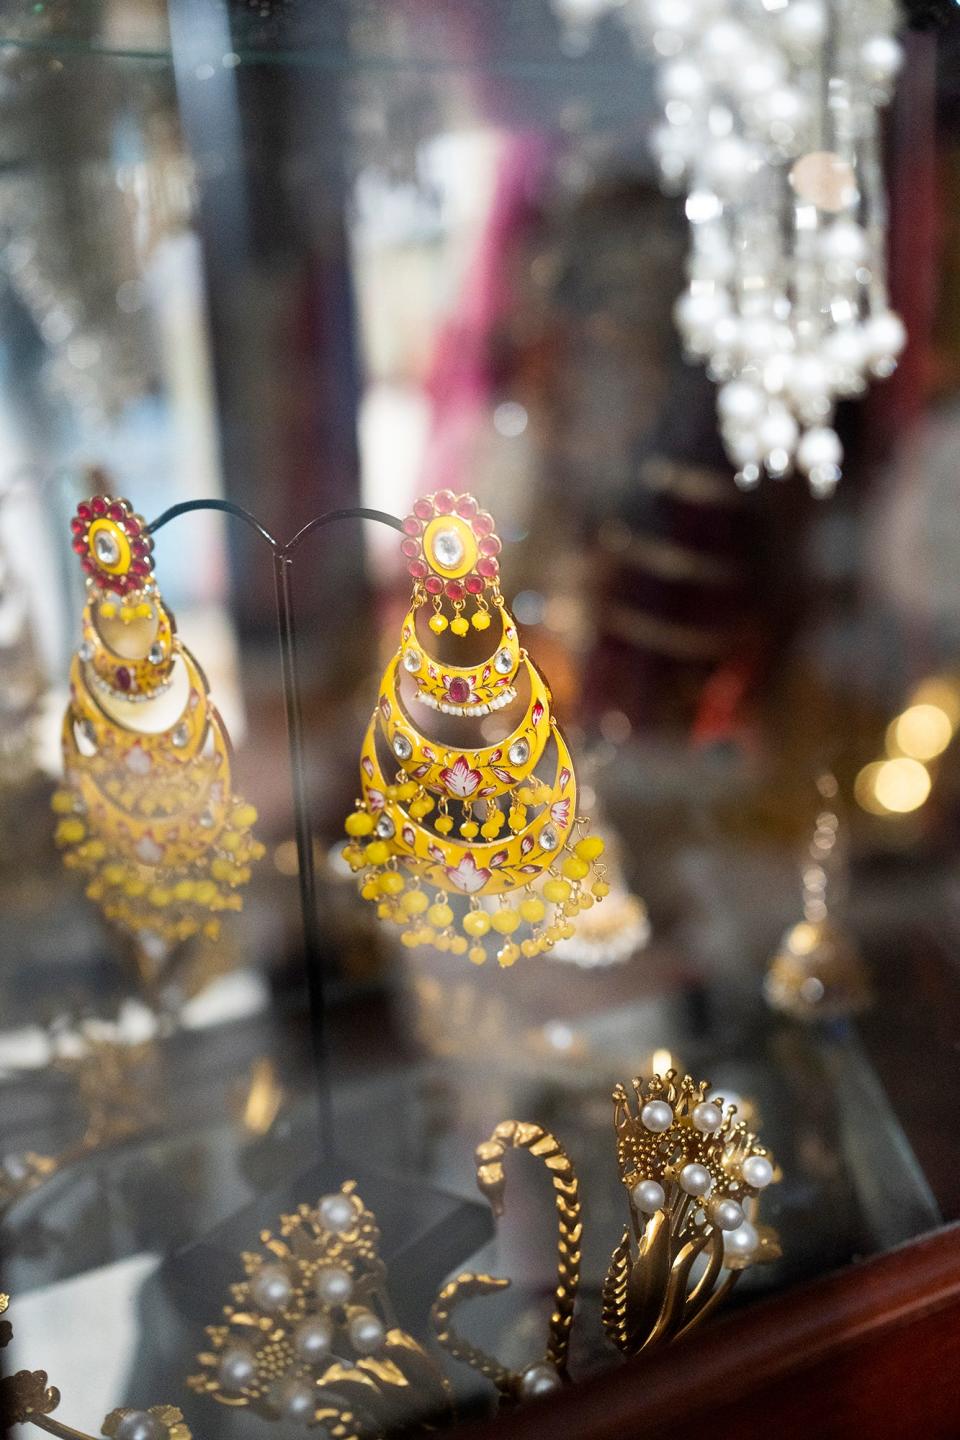 Earrings designed by Anjali Phougat, a Delaware County-based fashion designer, who is participating in New York Fashion Week. She created jewelry that Ellie Kemper wore as host of "The Great American Baking Show" and that Indian model Harnaaz Sandhu, Miss Universe 2021, wore on "The Daily Show with Trevor Noah."